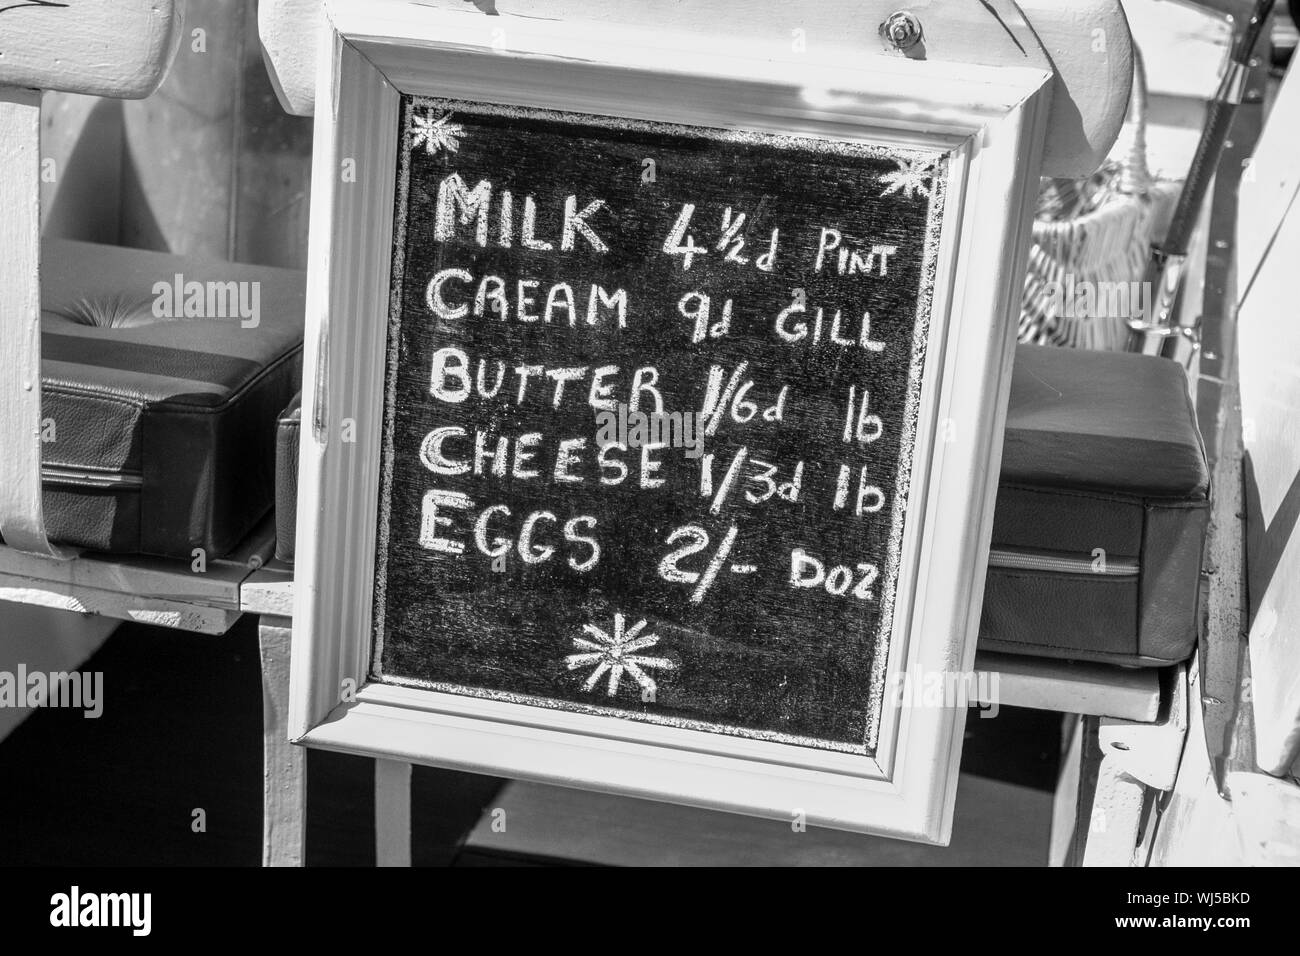 Chipping, Lancashire. Pre-Decimal pricing of Milk, Cream, Butter, Cheese, Eggs Stock Photo